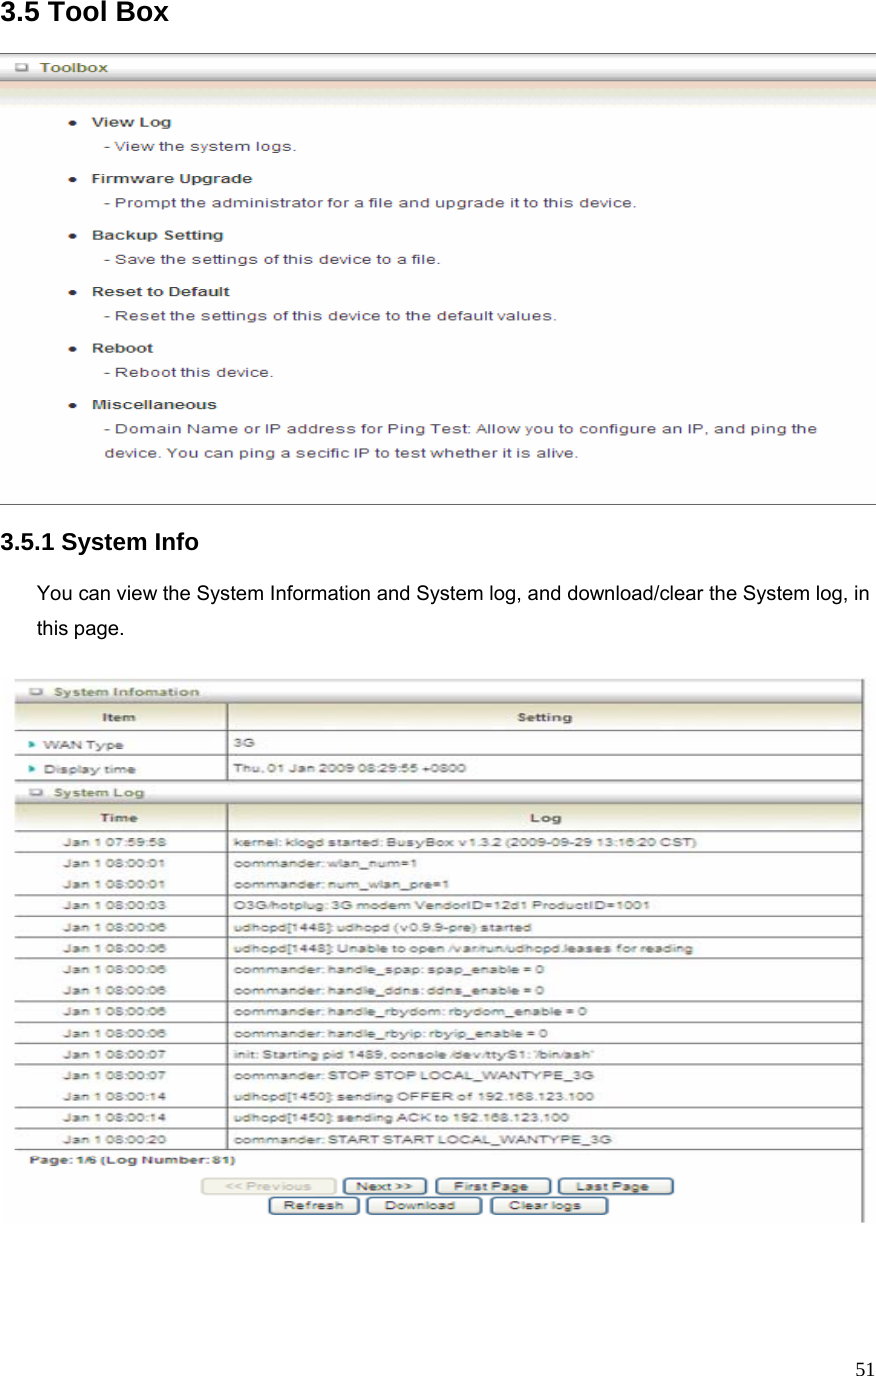  513.5 Tool Box    3.5.1 System Info  You can view the System Information and System log, and download/clear the System log, in this page.      